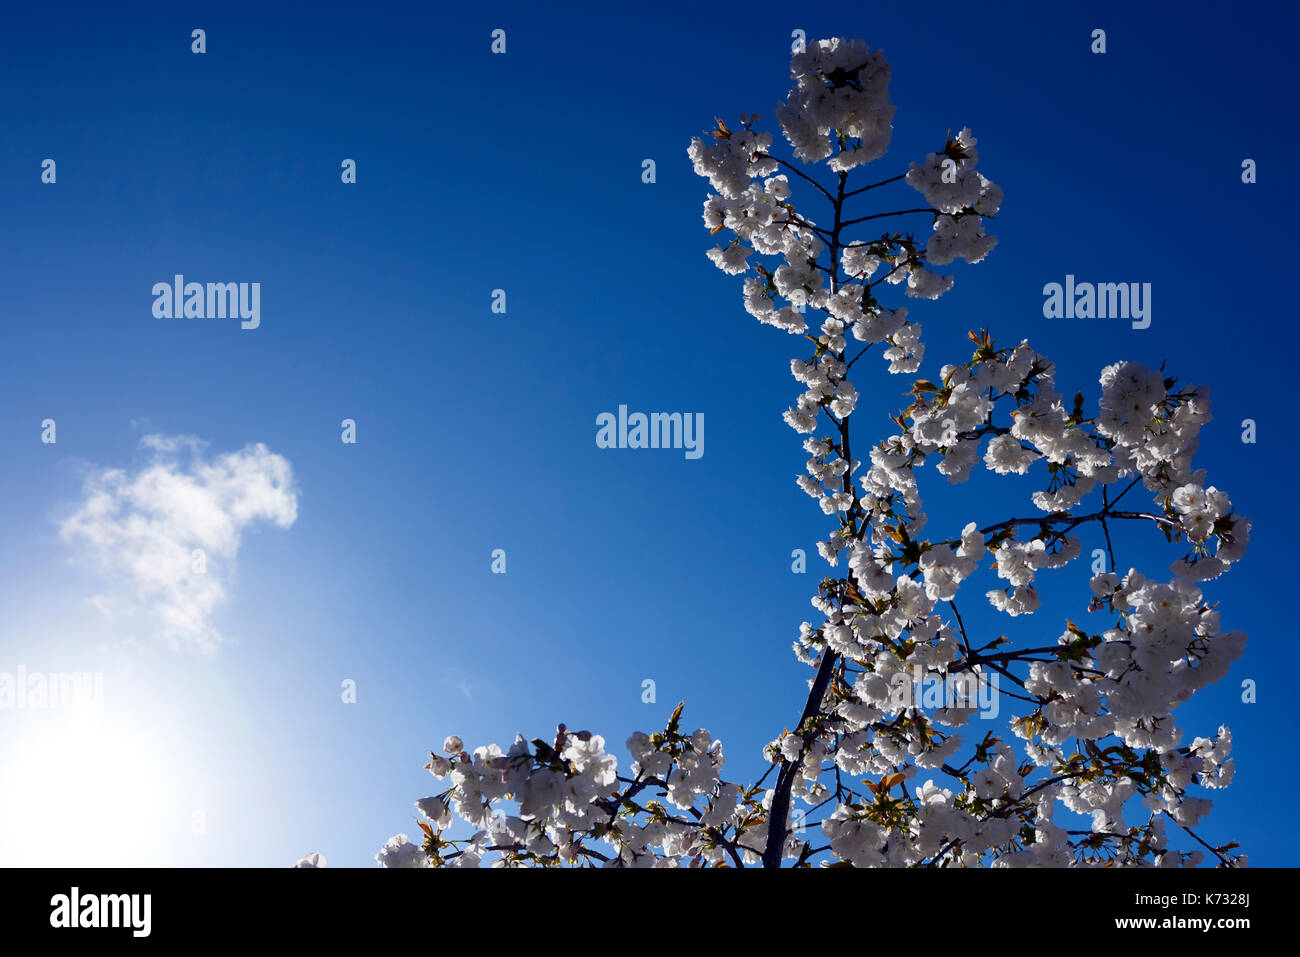 A cluster of newly flowering Cherry blossom photographed against a deep blue sky. Stock Photo